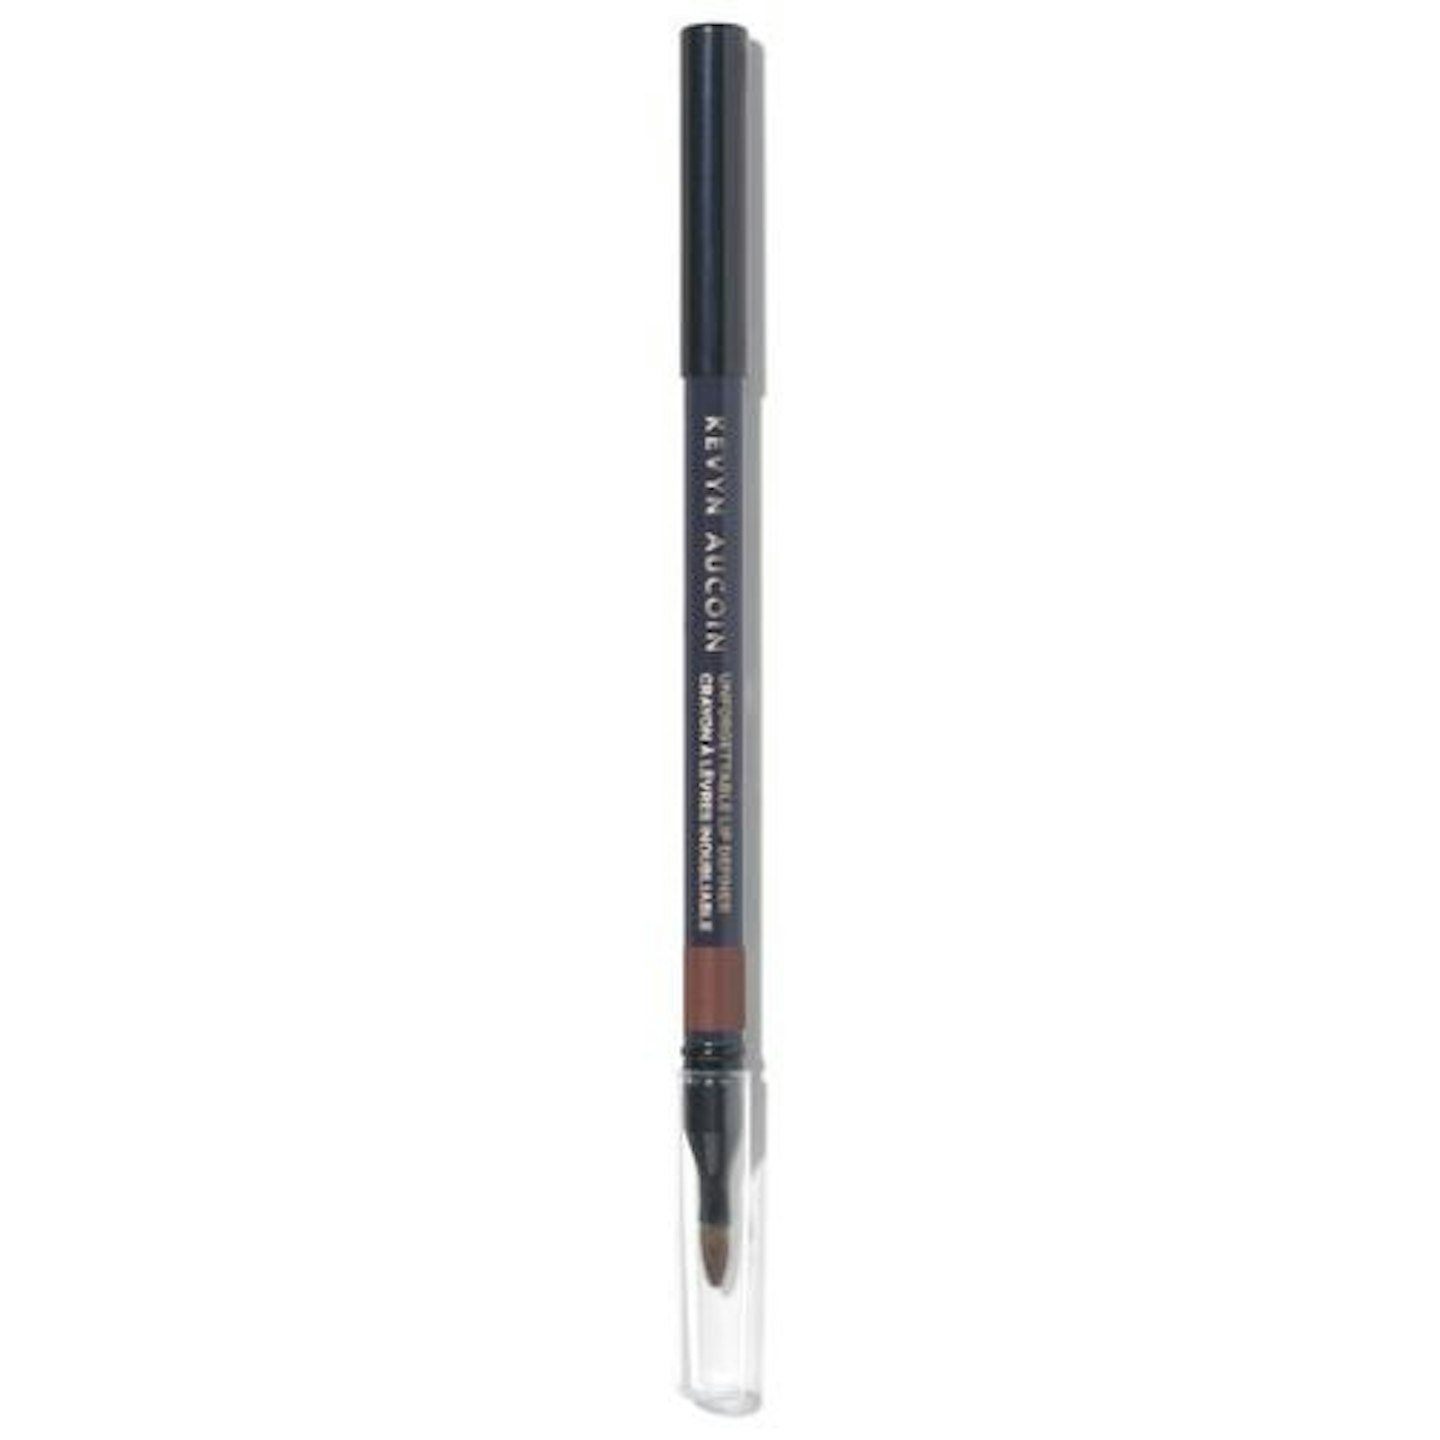 Kevyn Aucoin Unforgettable Lip Definer - New Naked